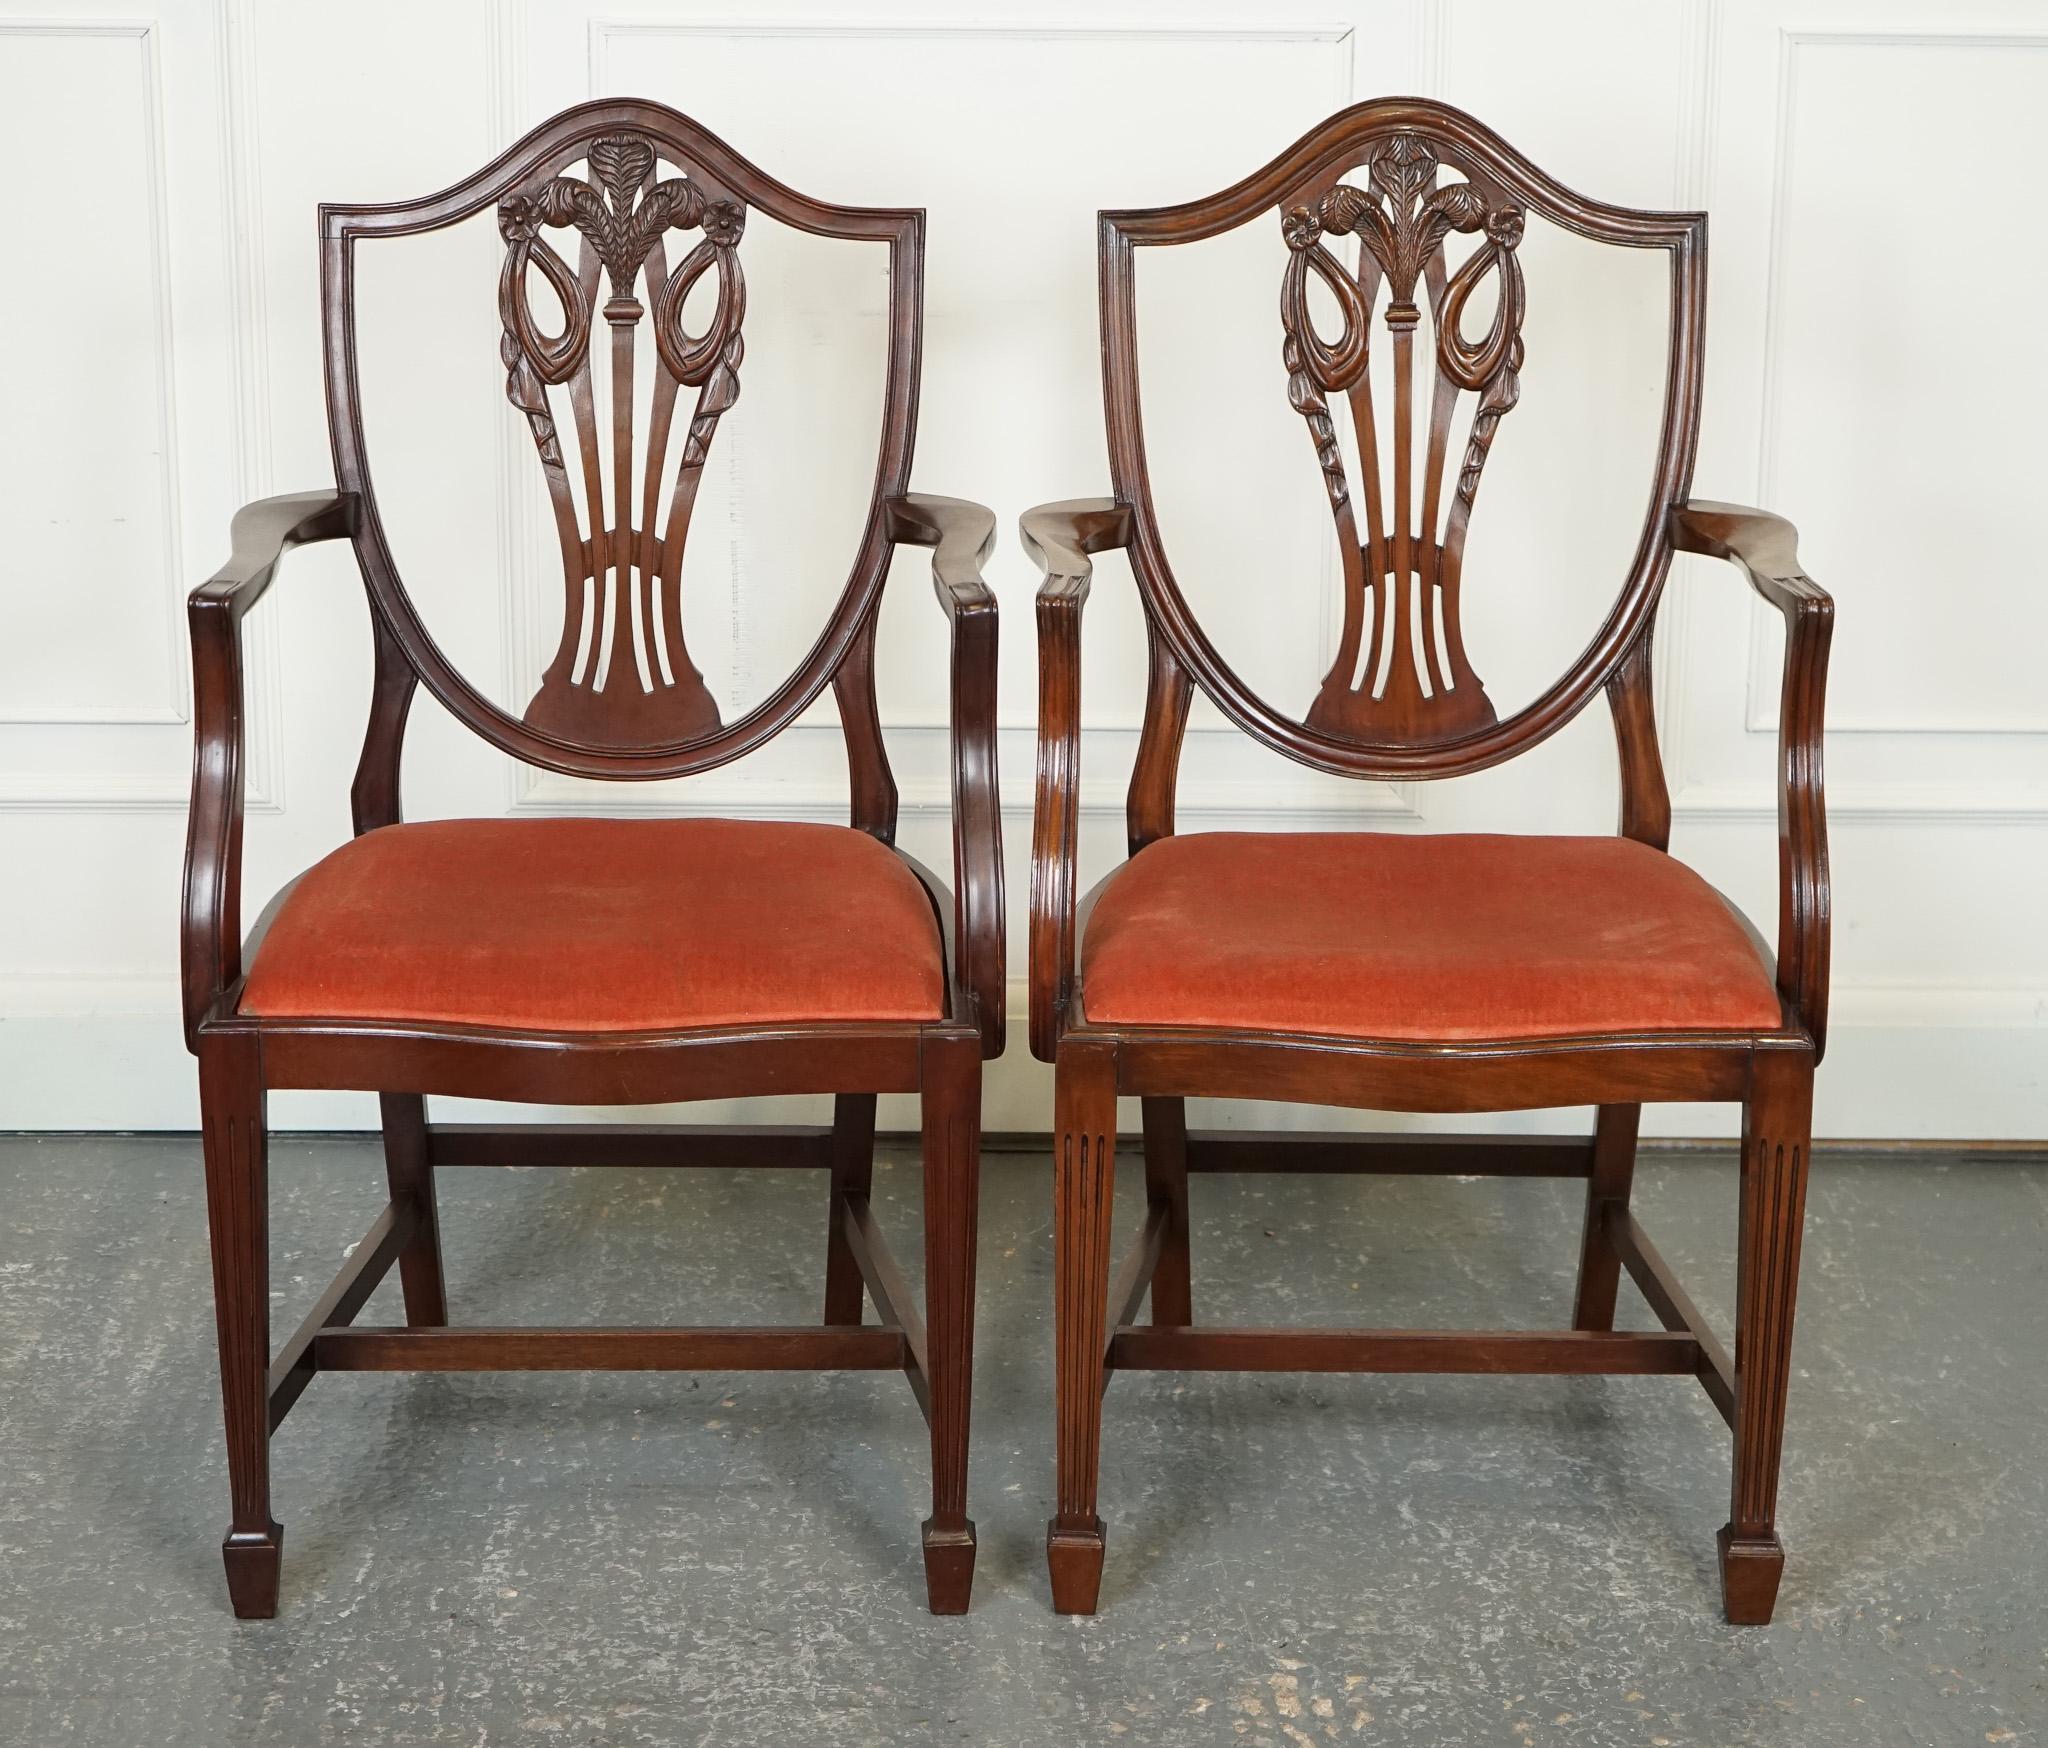 Antiques of London



We are delighted to offer for sale this Lovely Pair Of Victorian Hepplewhite Carver Hallway Side Chairs.

These Victorian Hepplewhite carver hallway side chairs are truly lovely and exude an air of elegance and sophistication.